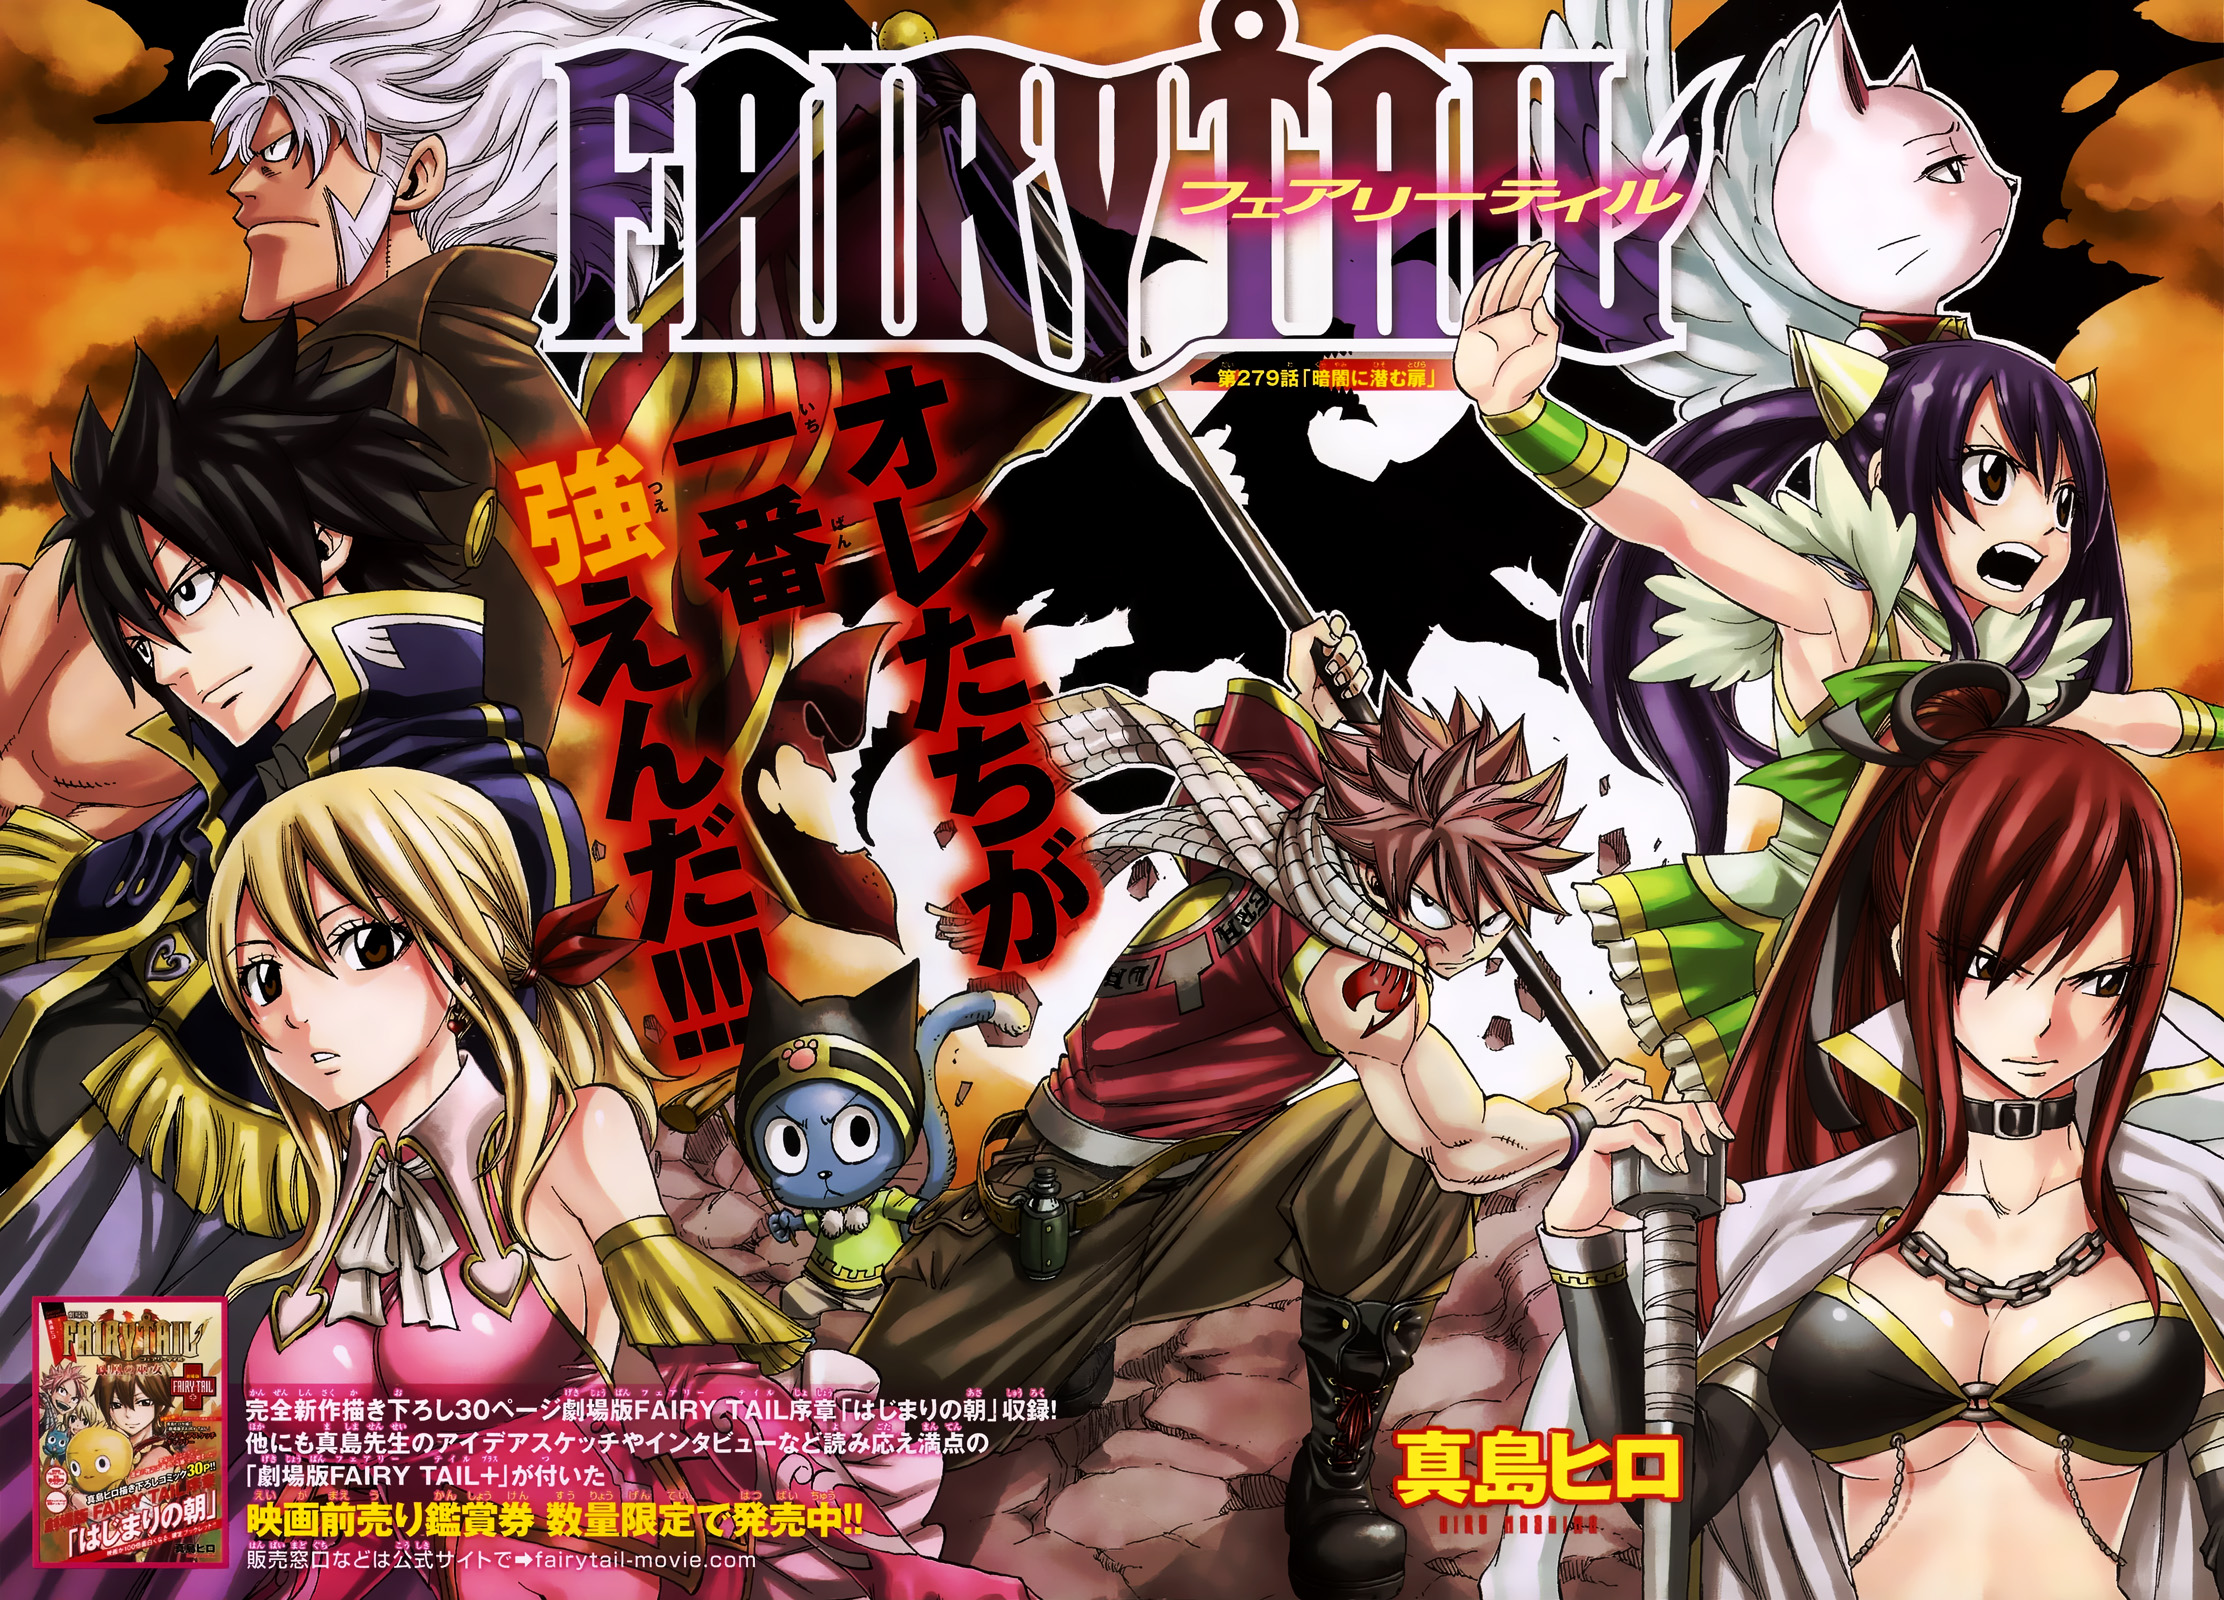 MS] Chapter 483  Preview : r/fairytail